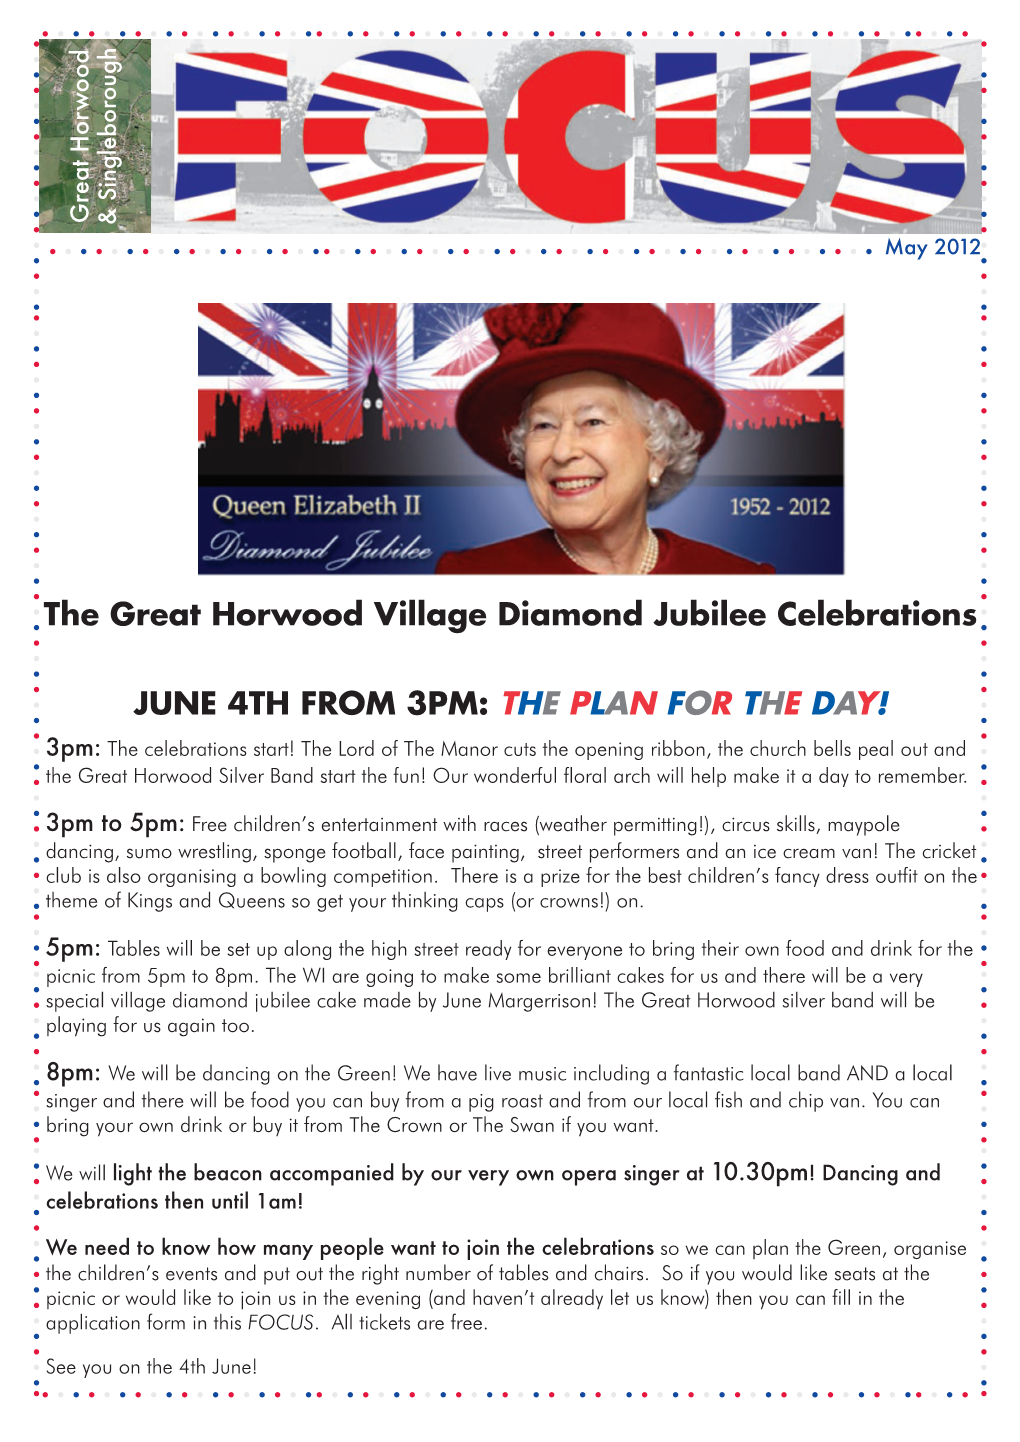 The Great Horwood Village Diamond Jubilee Celebrations JUNE 4TH FROM